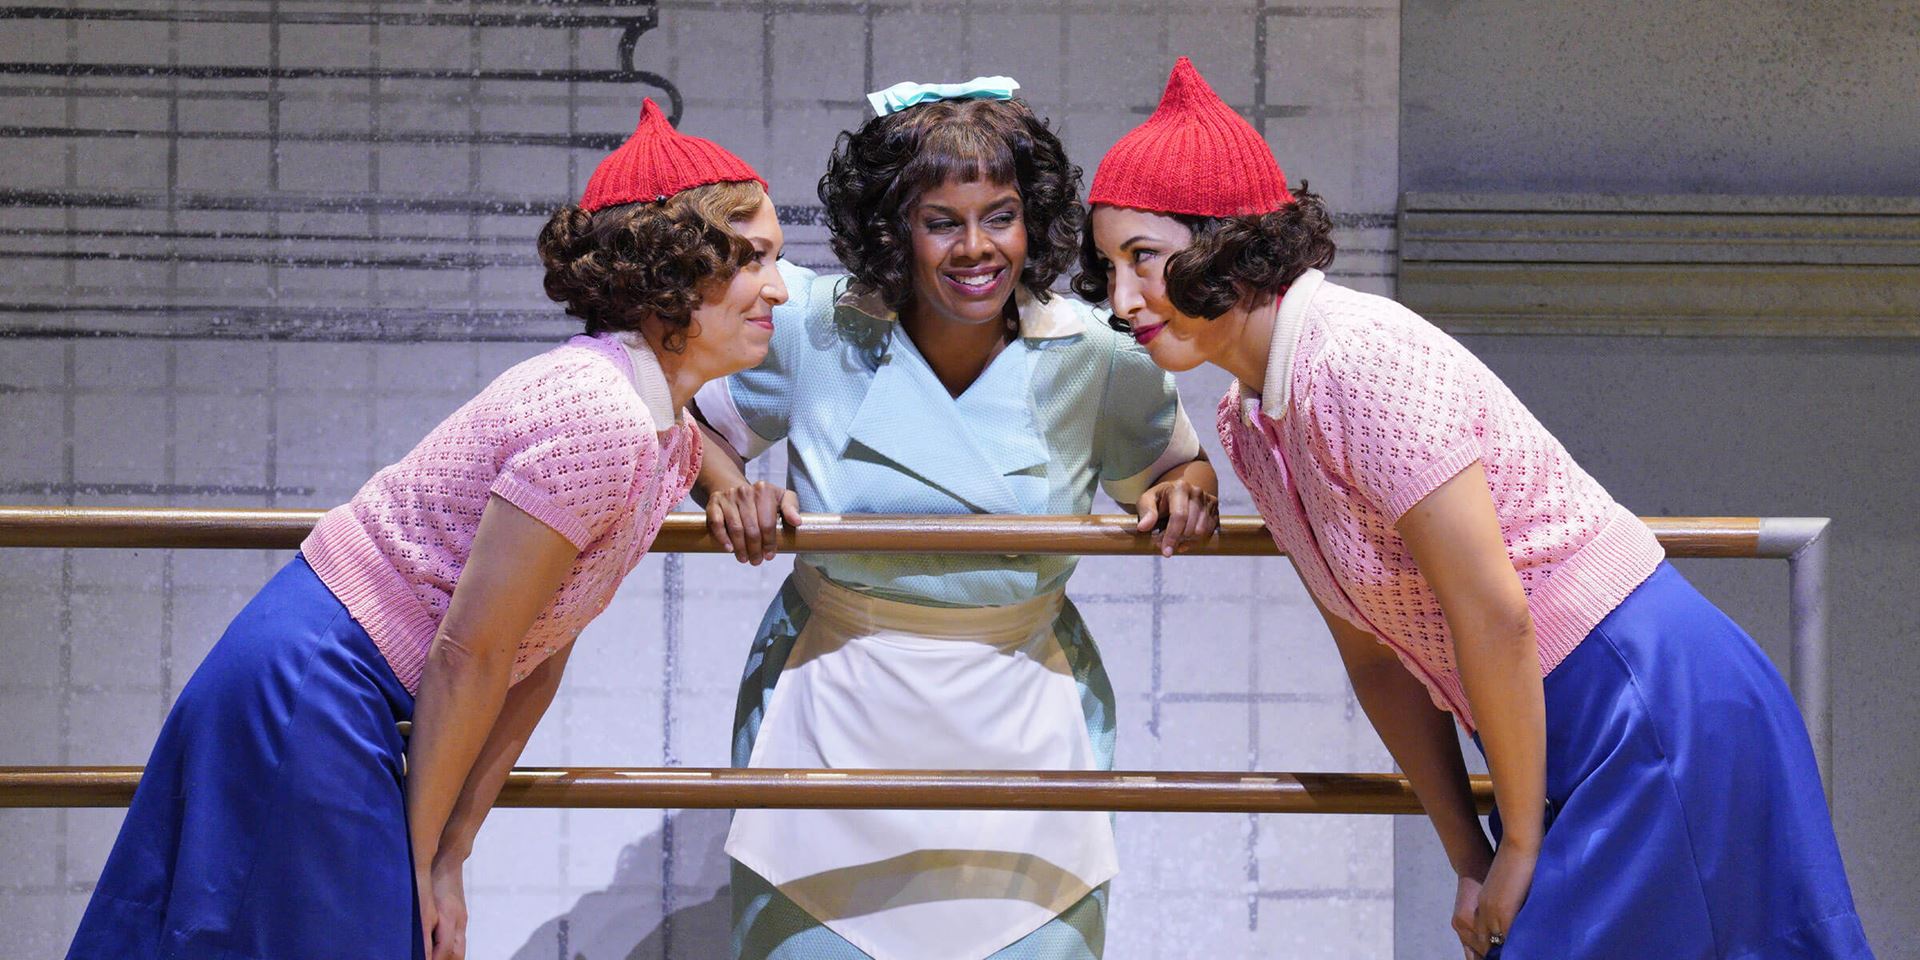 two women wearing similar costumes singing in front of a third women who stands between them